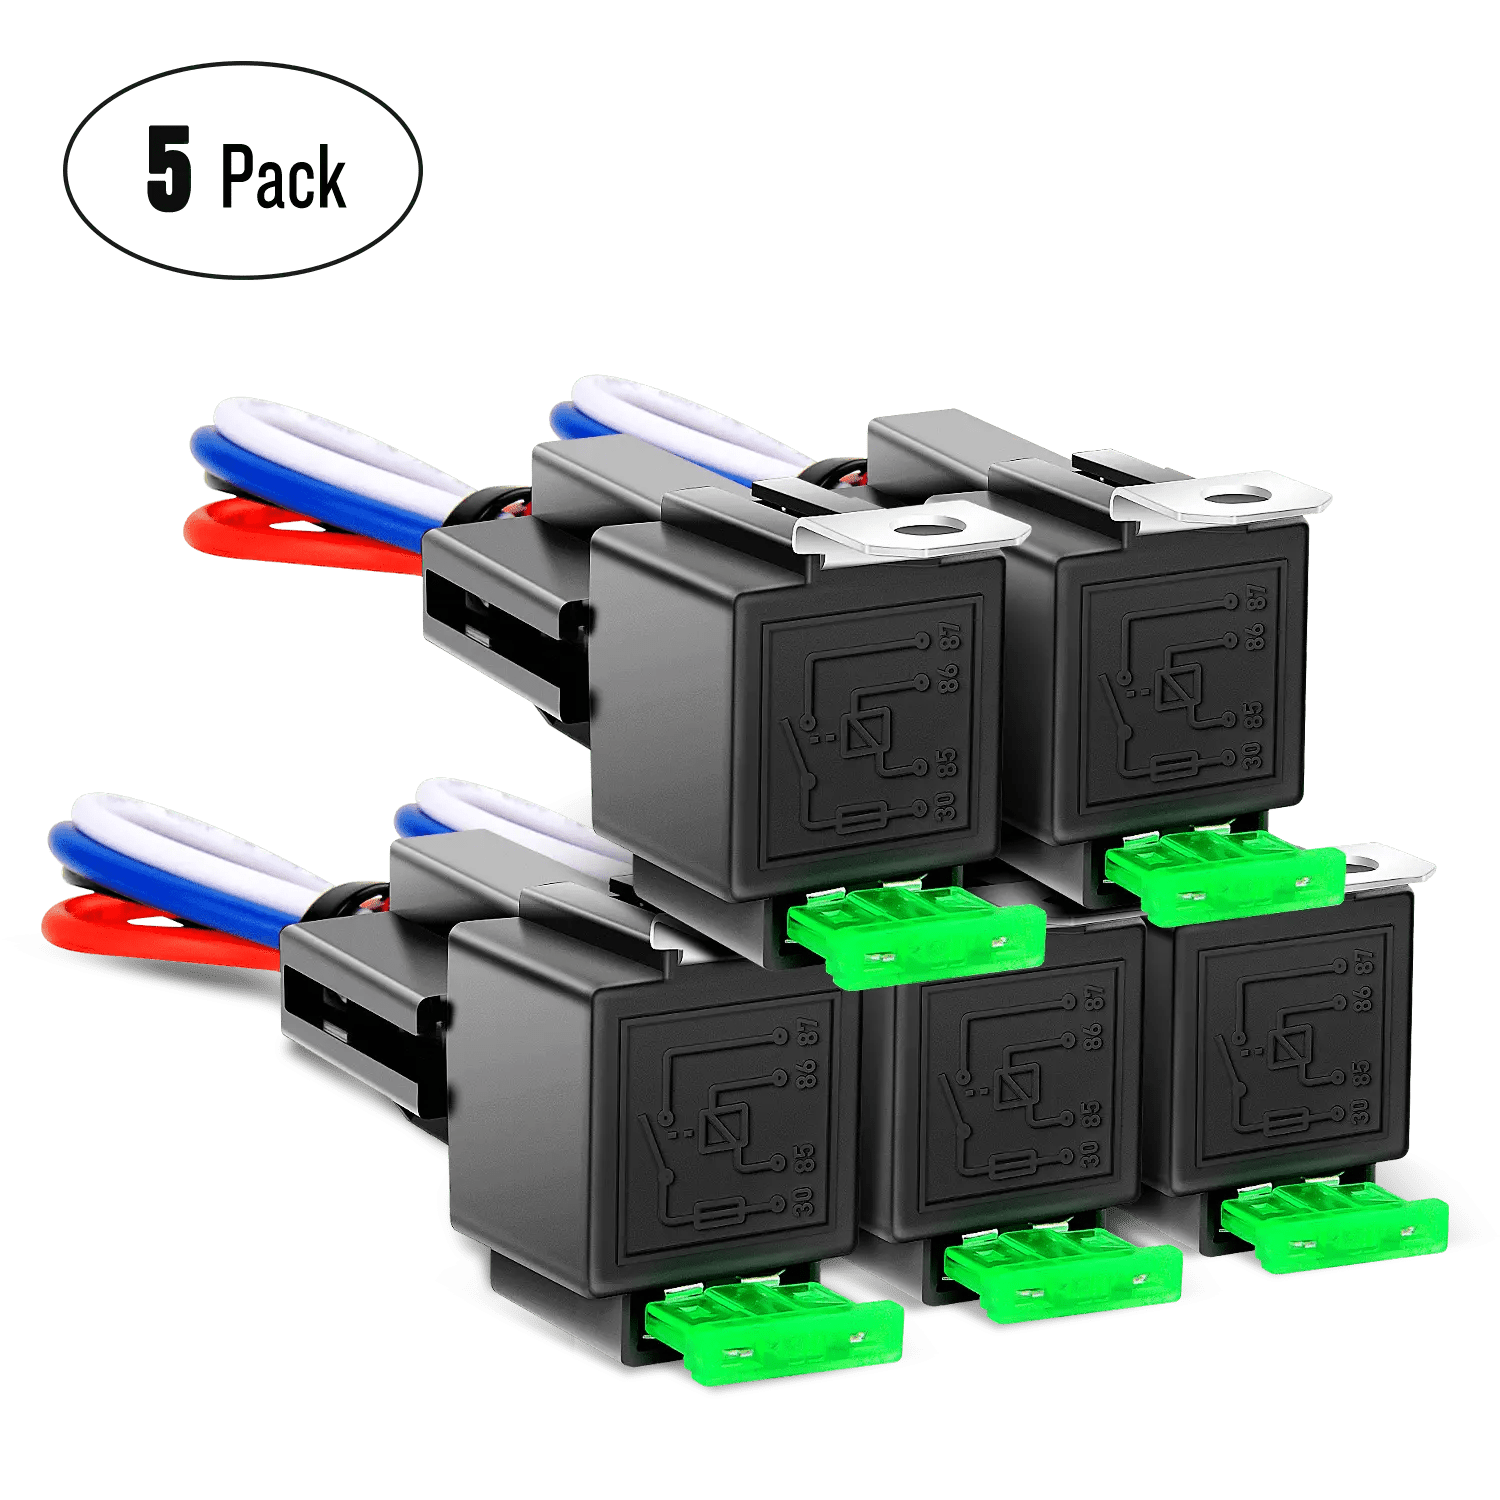 Accessories 5Pack 30A Fuse 4Pin SPST Relays Switches Harness Set